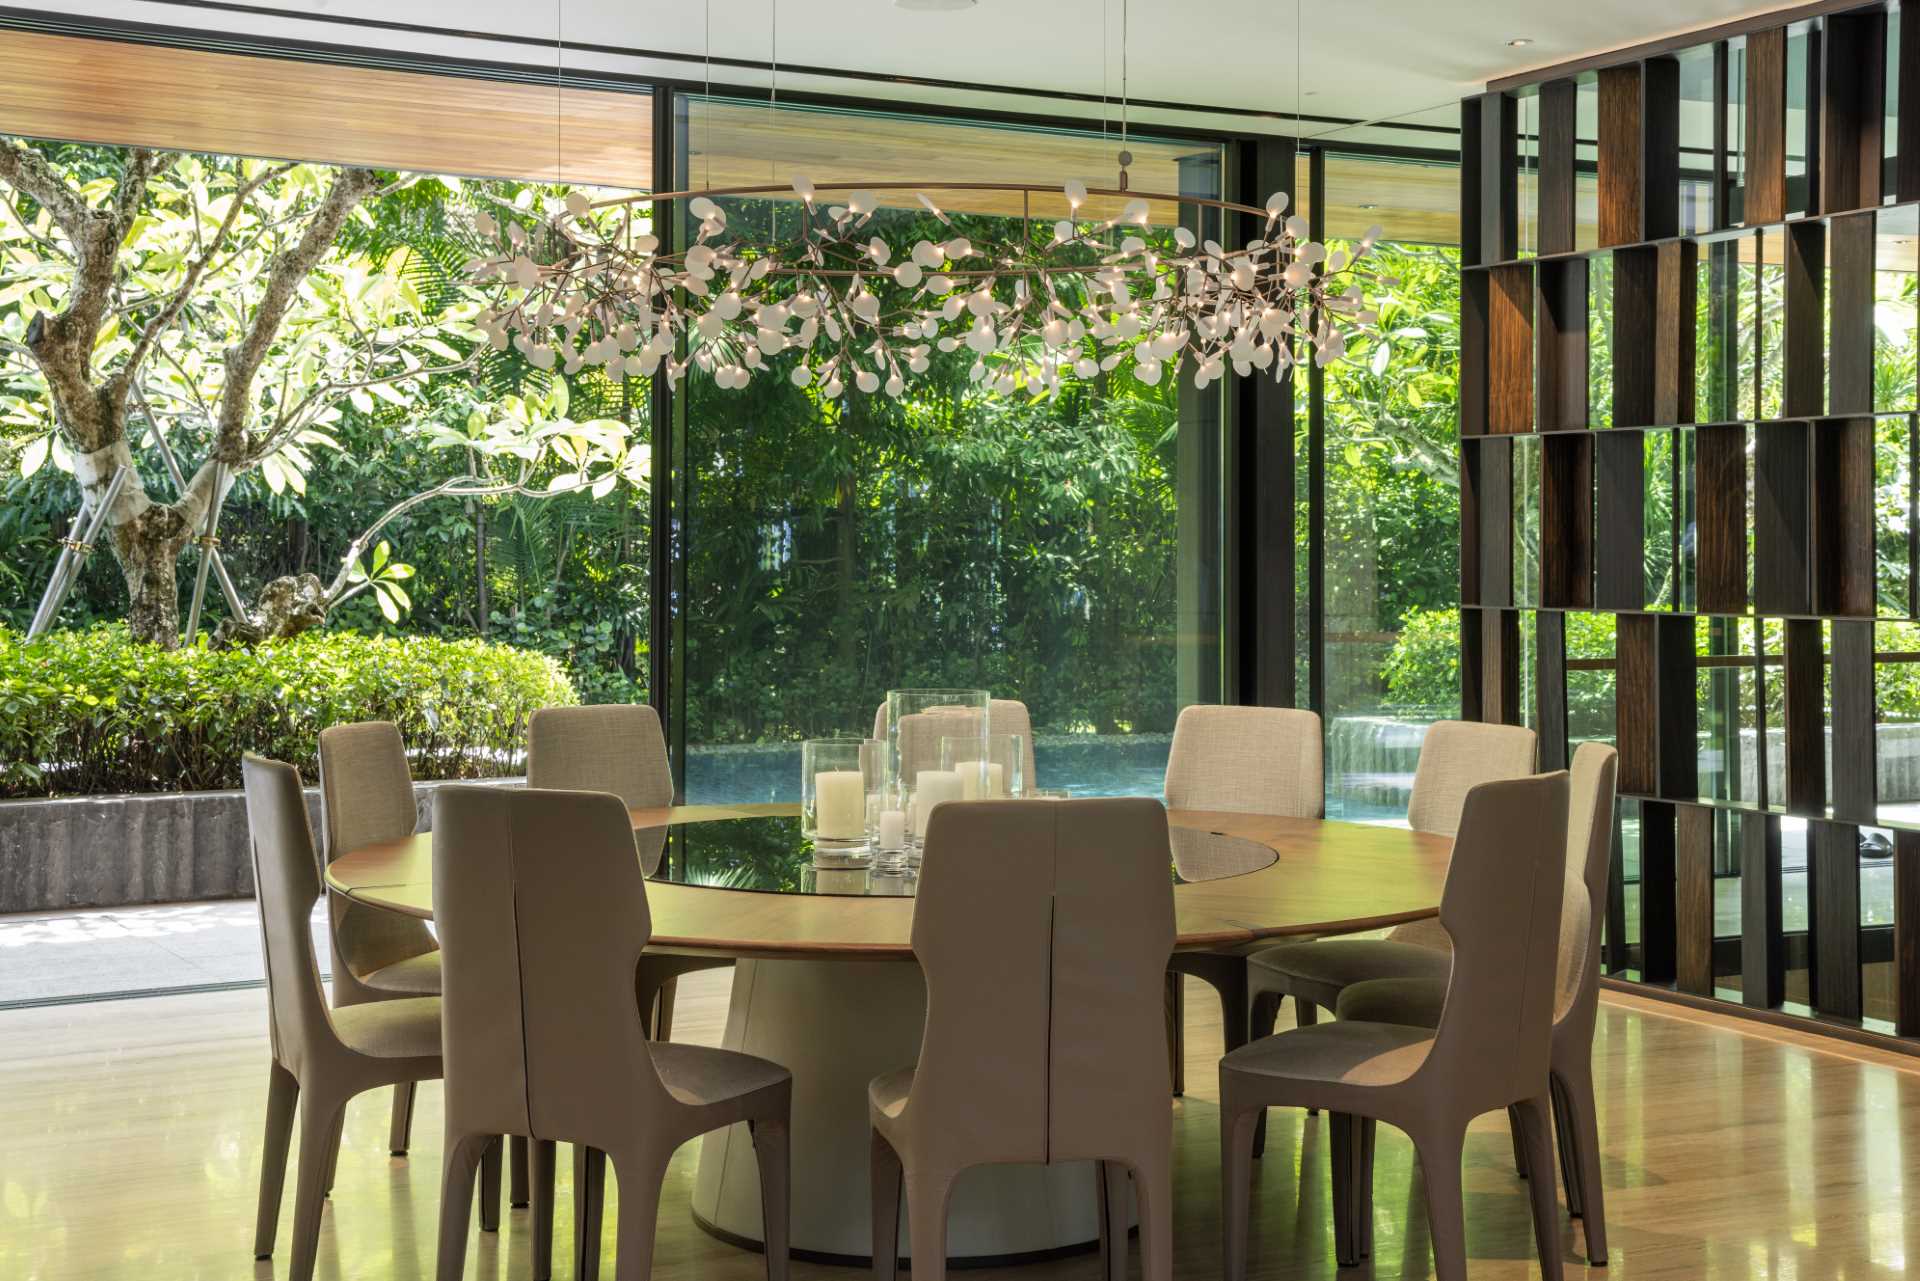 A modern dining room has gl، walls that open to the outdoors.